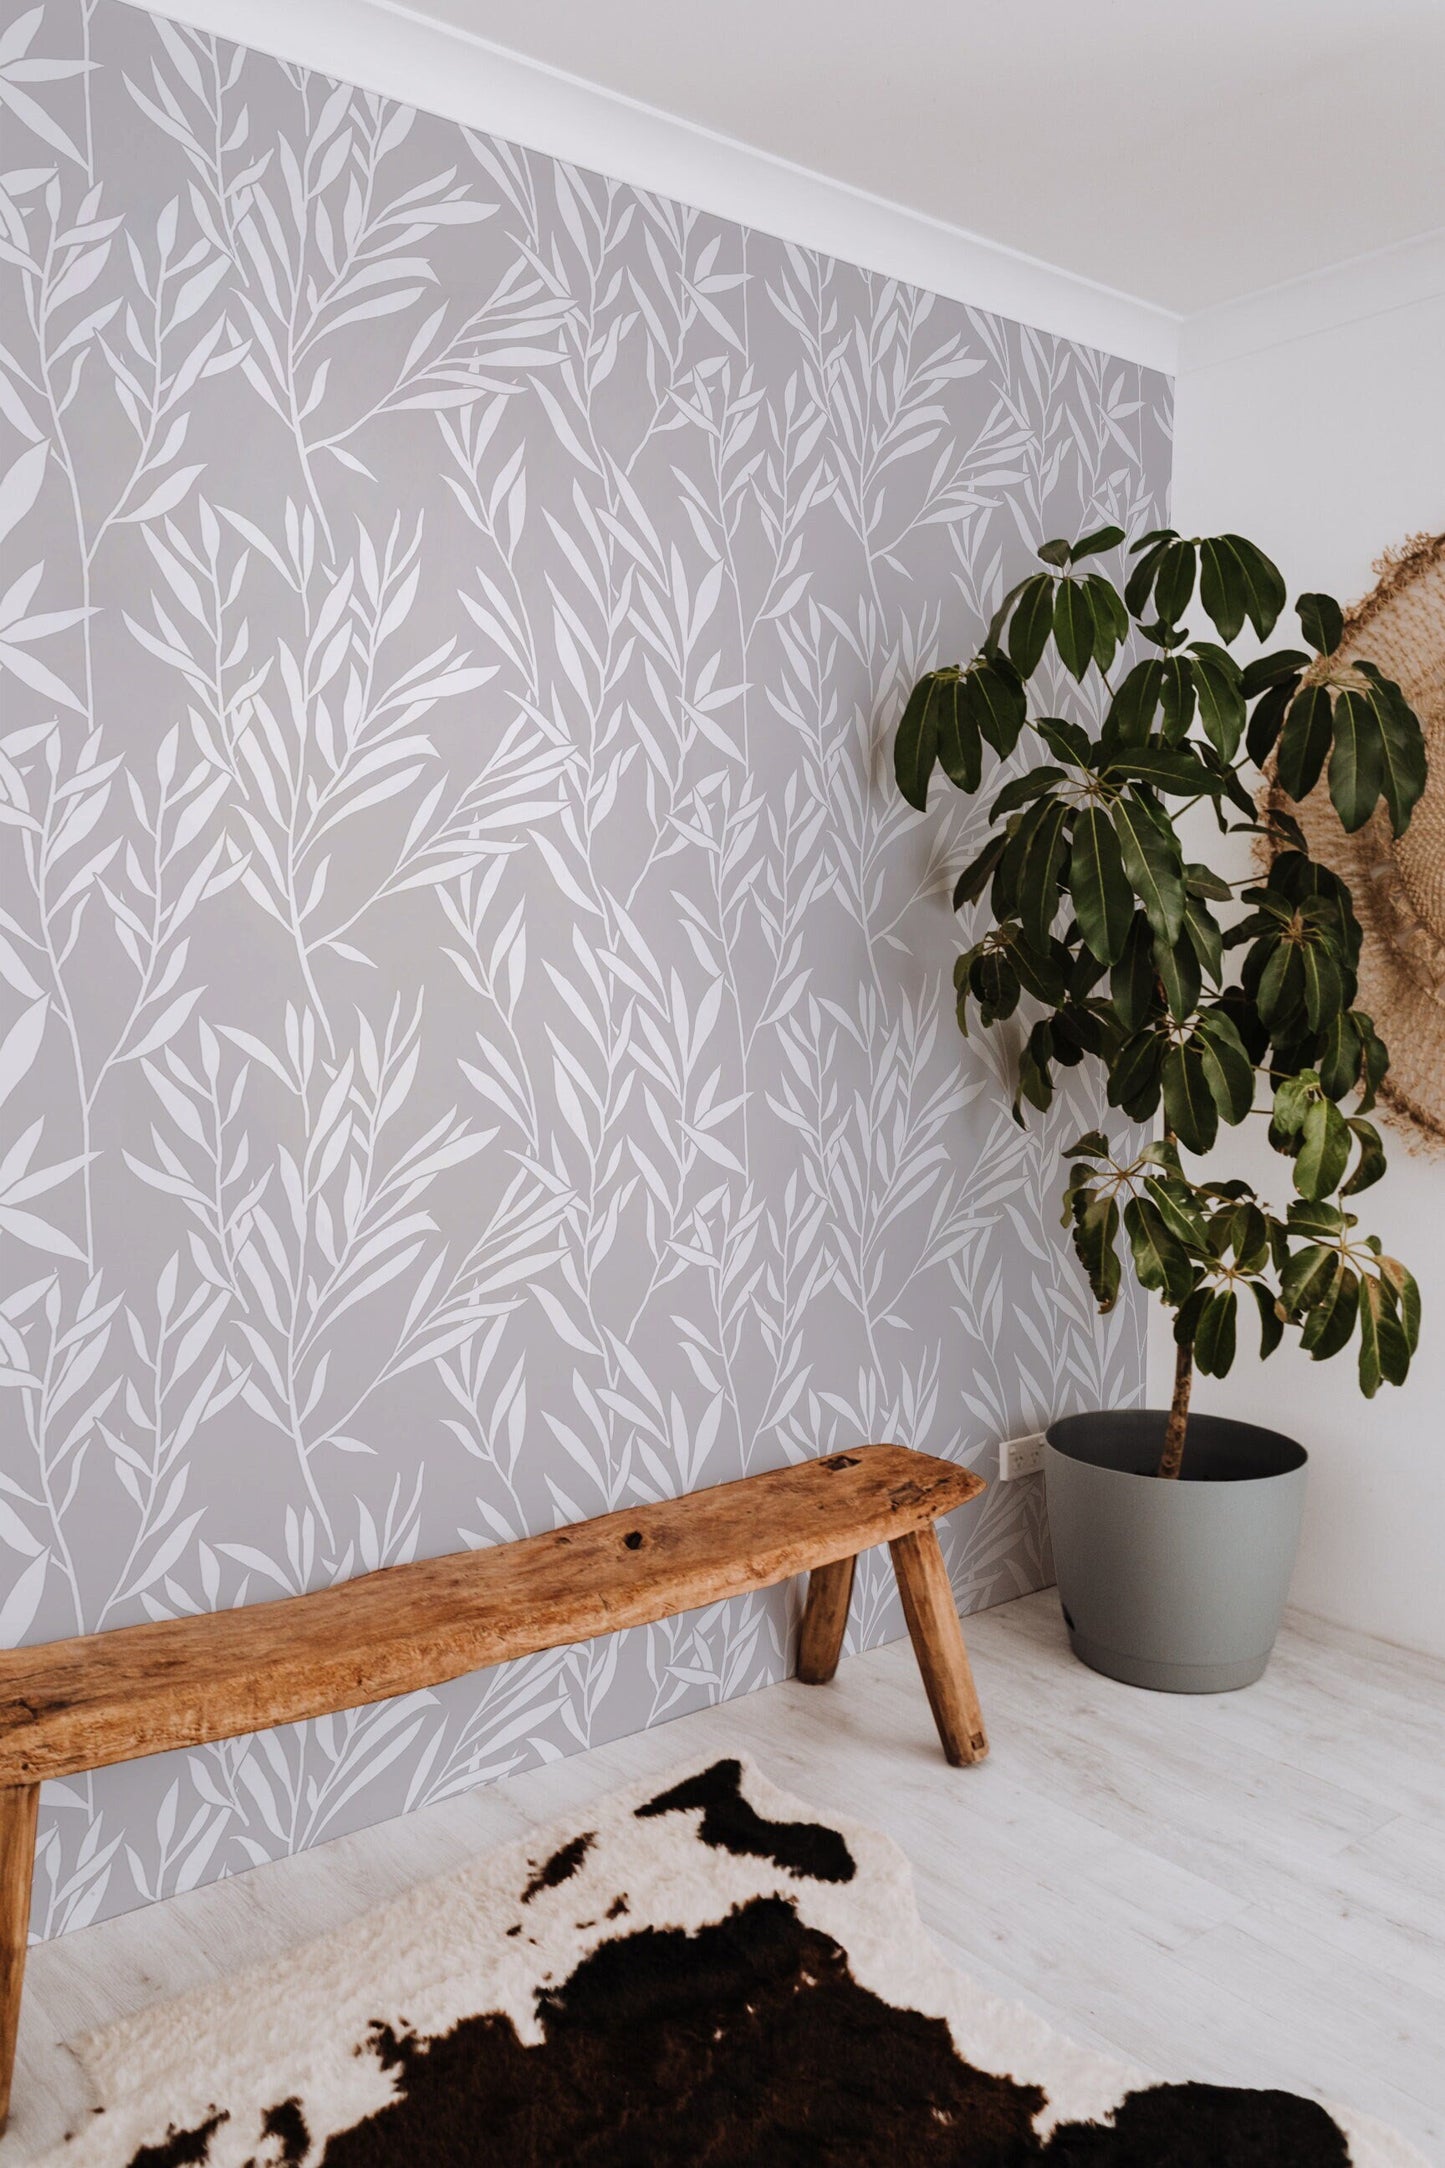 Botanical Gray Removable Decorative Wallpaper, White Leaf Minimal Wall Peel and Stick Mural, Delicate Pompous Grass Wallpaper Roll